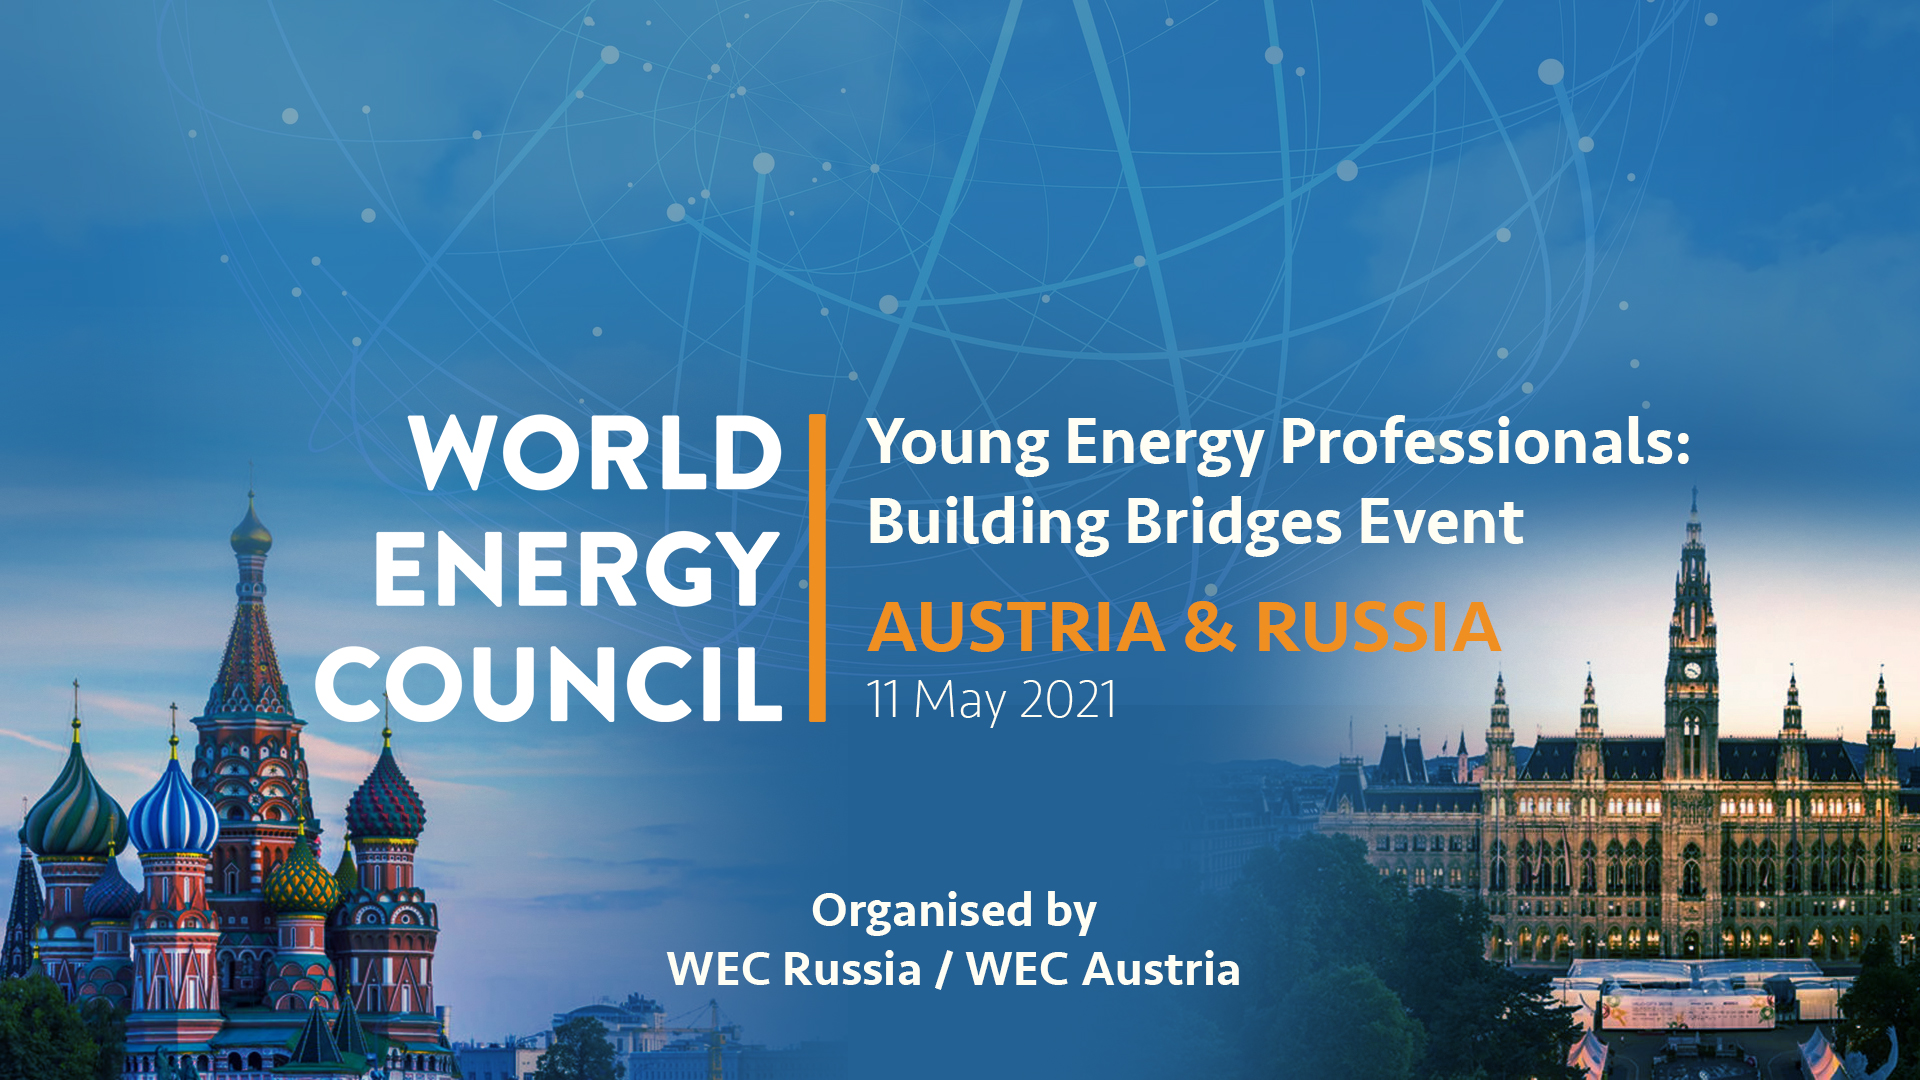 Young Energy Professionals from the World Energy Council’s Austrian and Russian Member Committees initiated cooperation